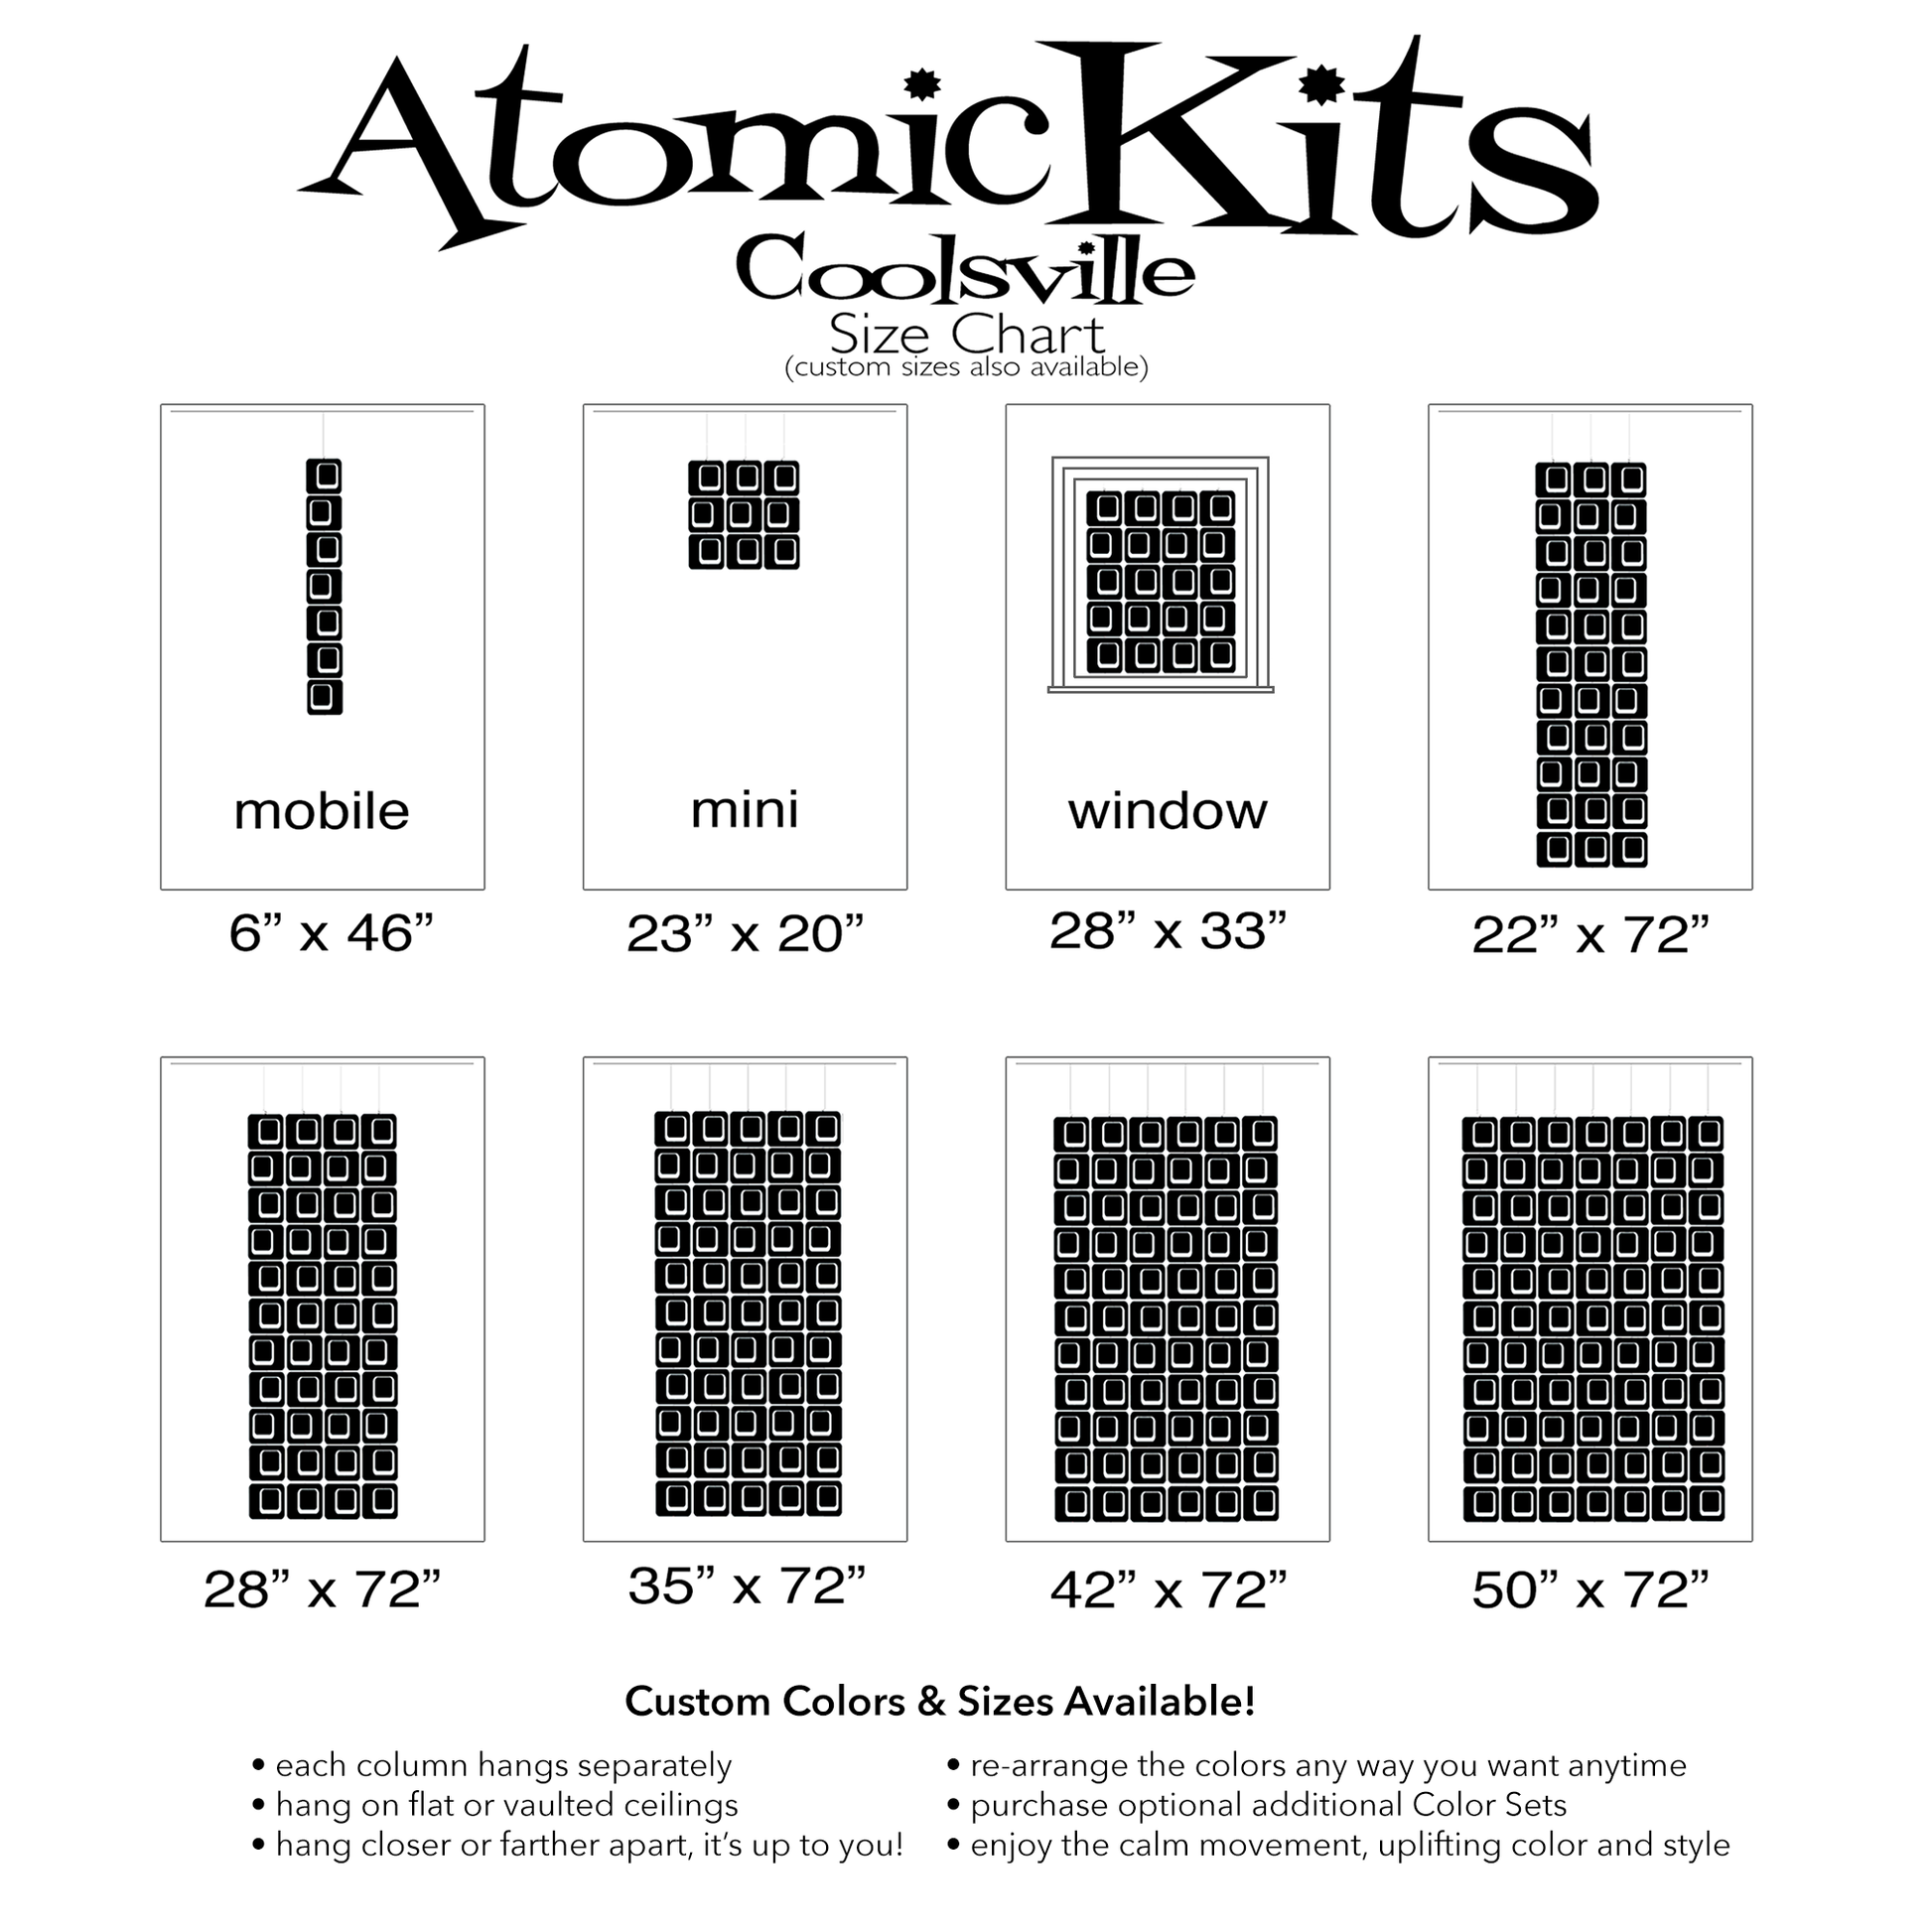 Size Chart for Coolsville in Black for Room Dividers, Curtains, Mobiles, and Wall Art DIY KIT by AtomicMobiles.com